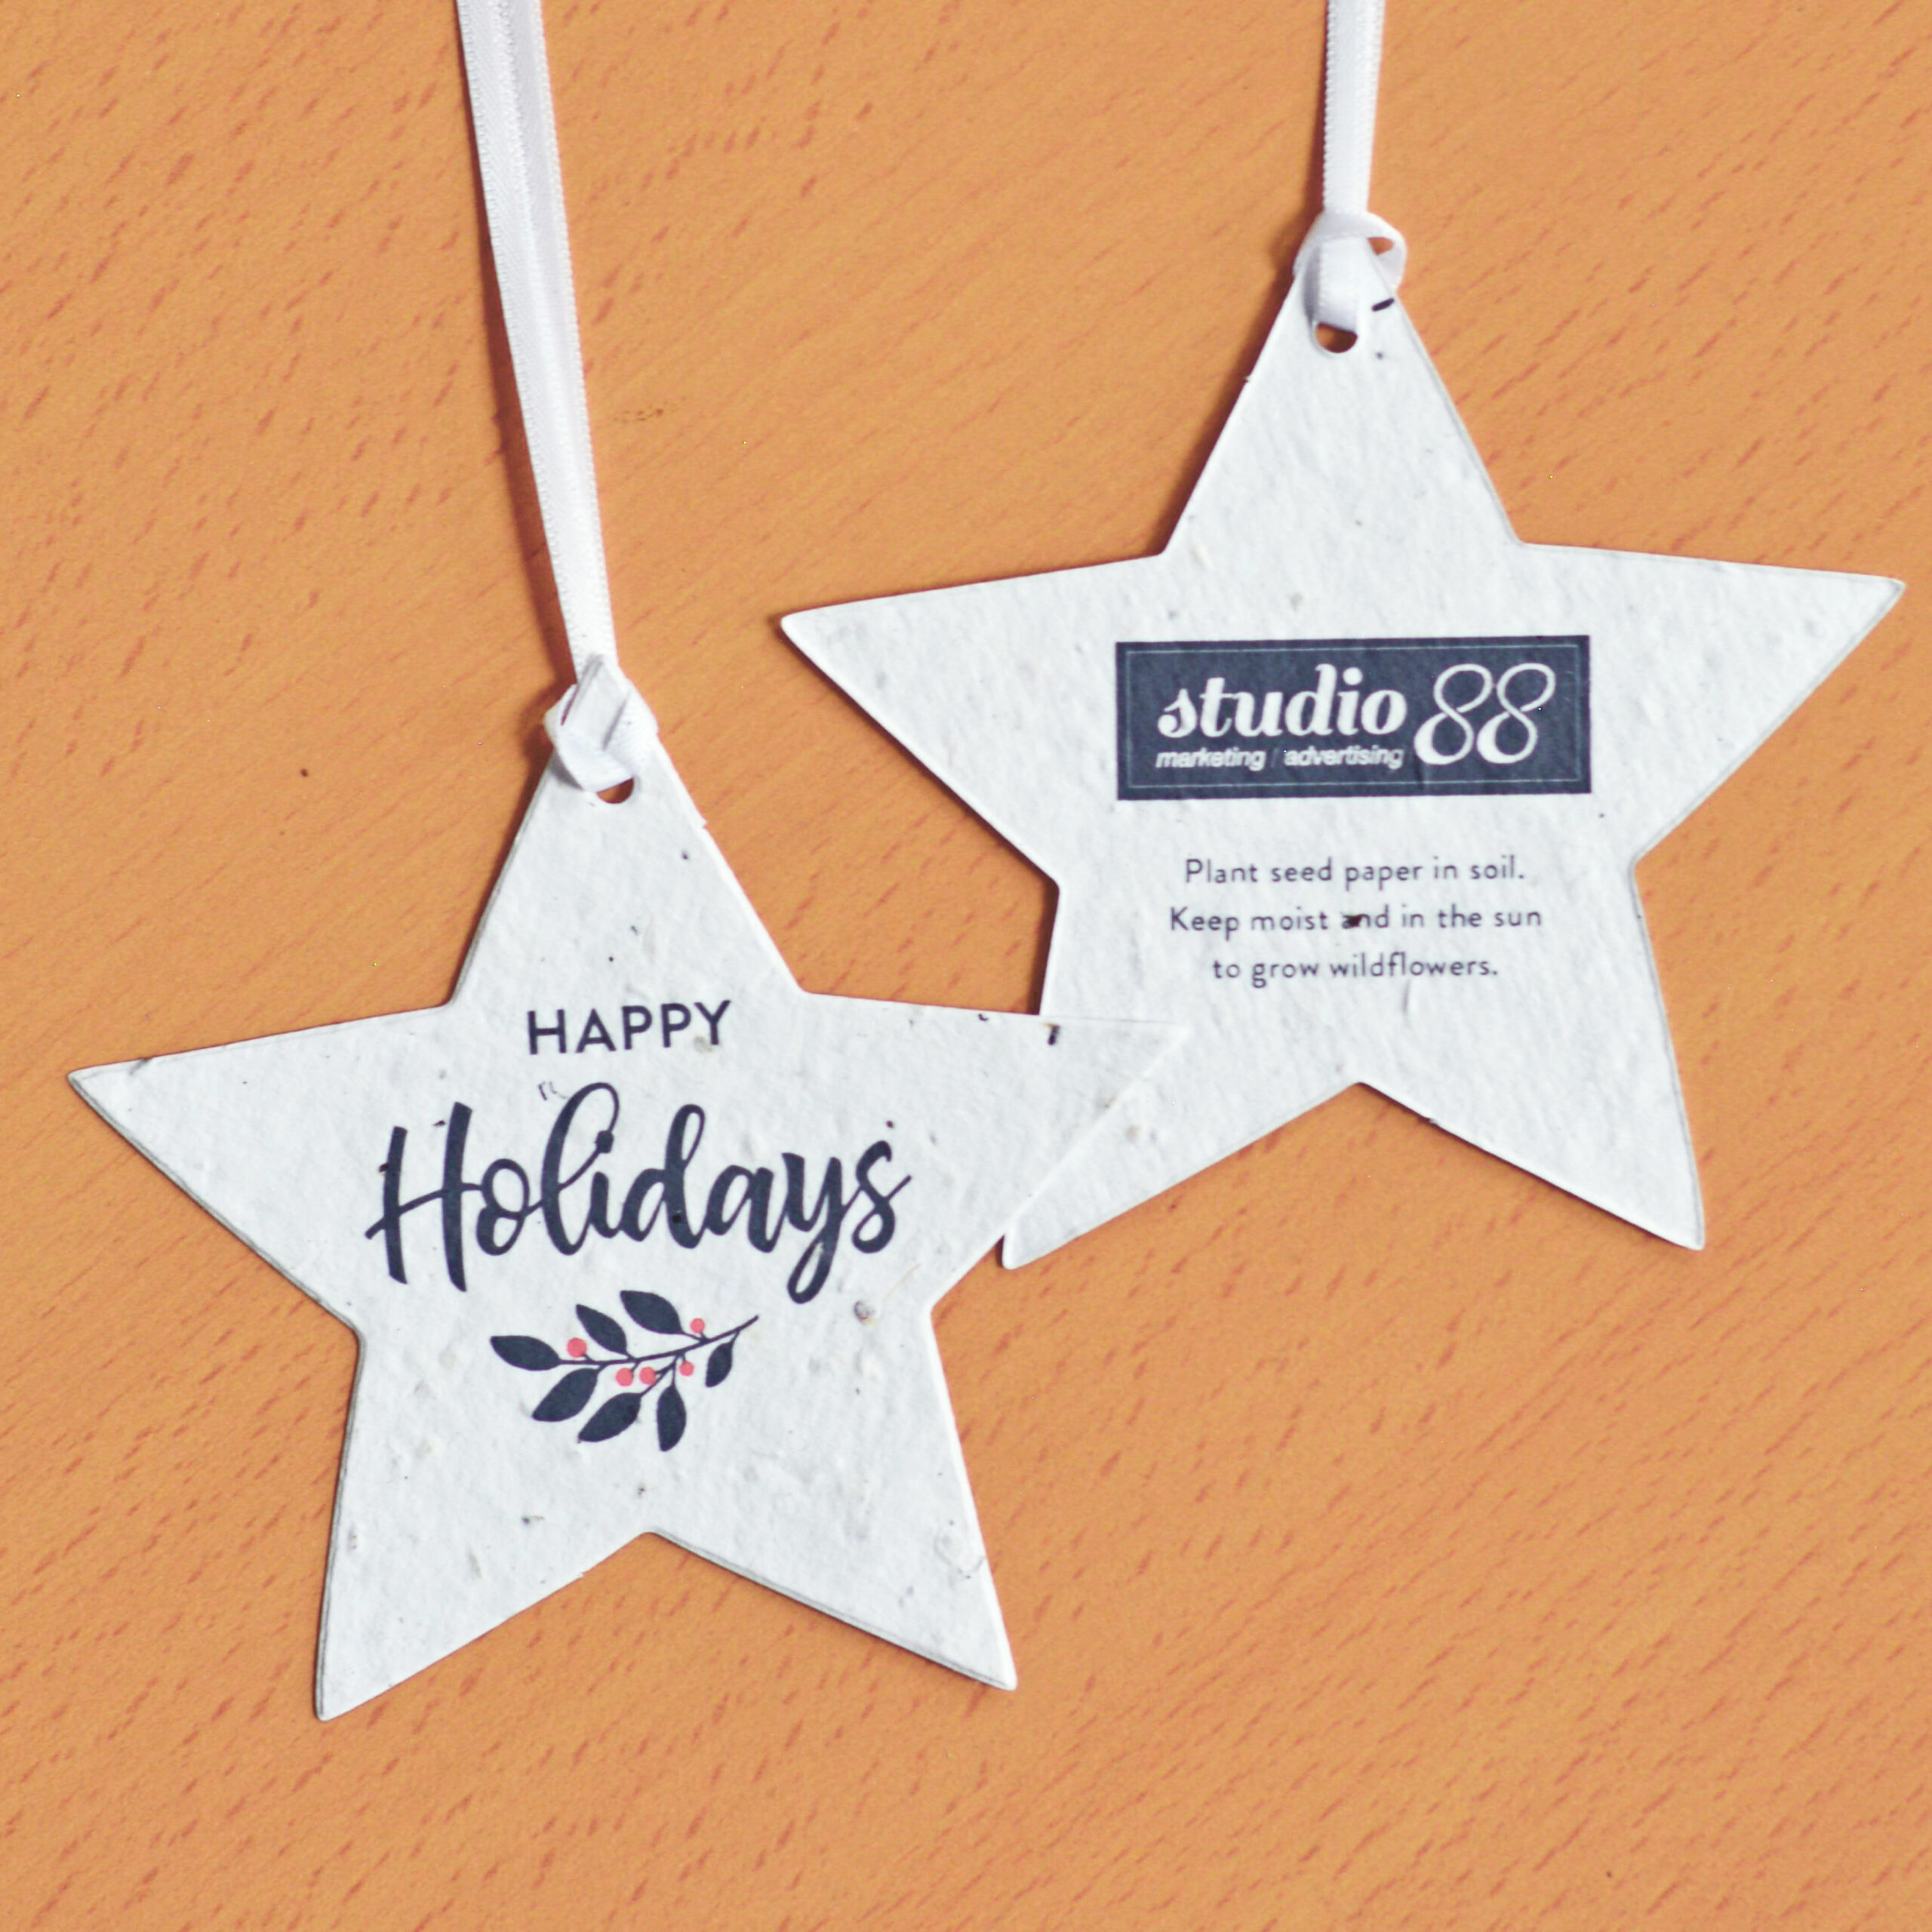 An add-your-logo seed paper ornament in the shape of star with black Happy Holidays text and a festive twig